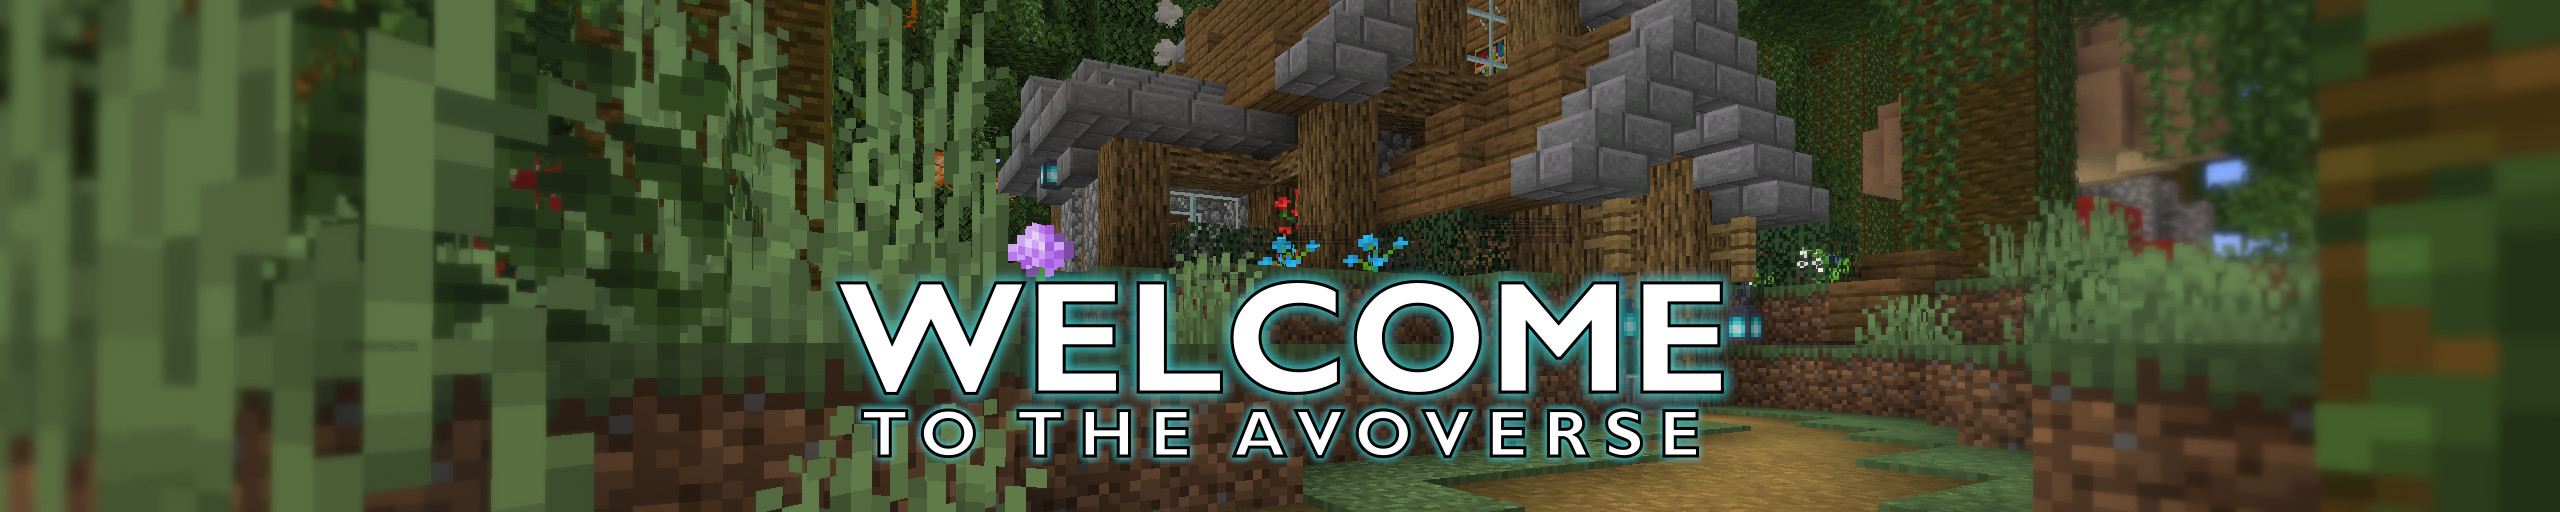 Banner image - Welcome to the AvoVerse